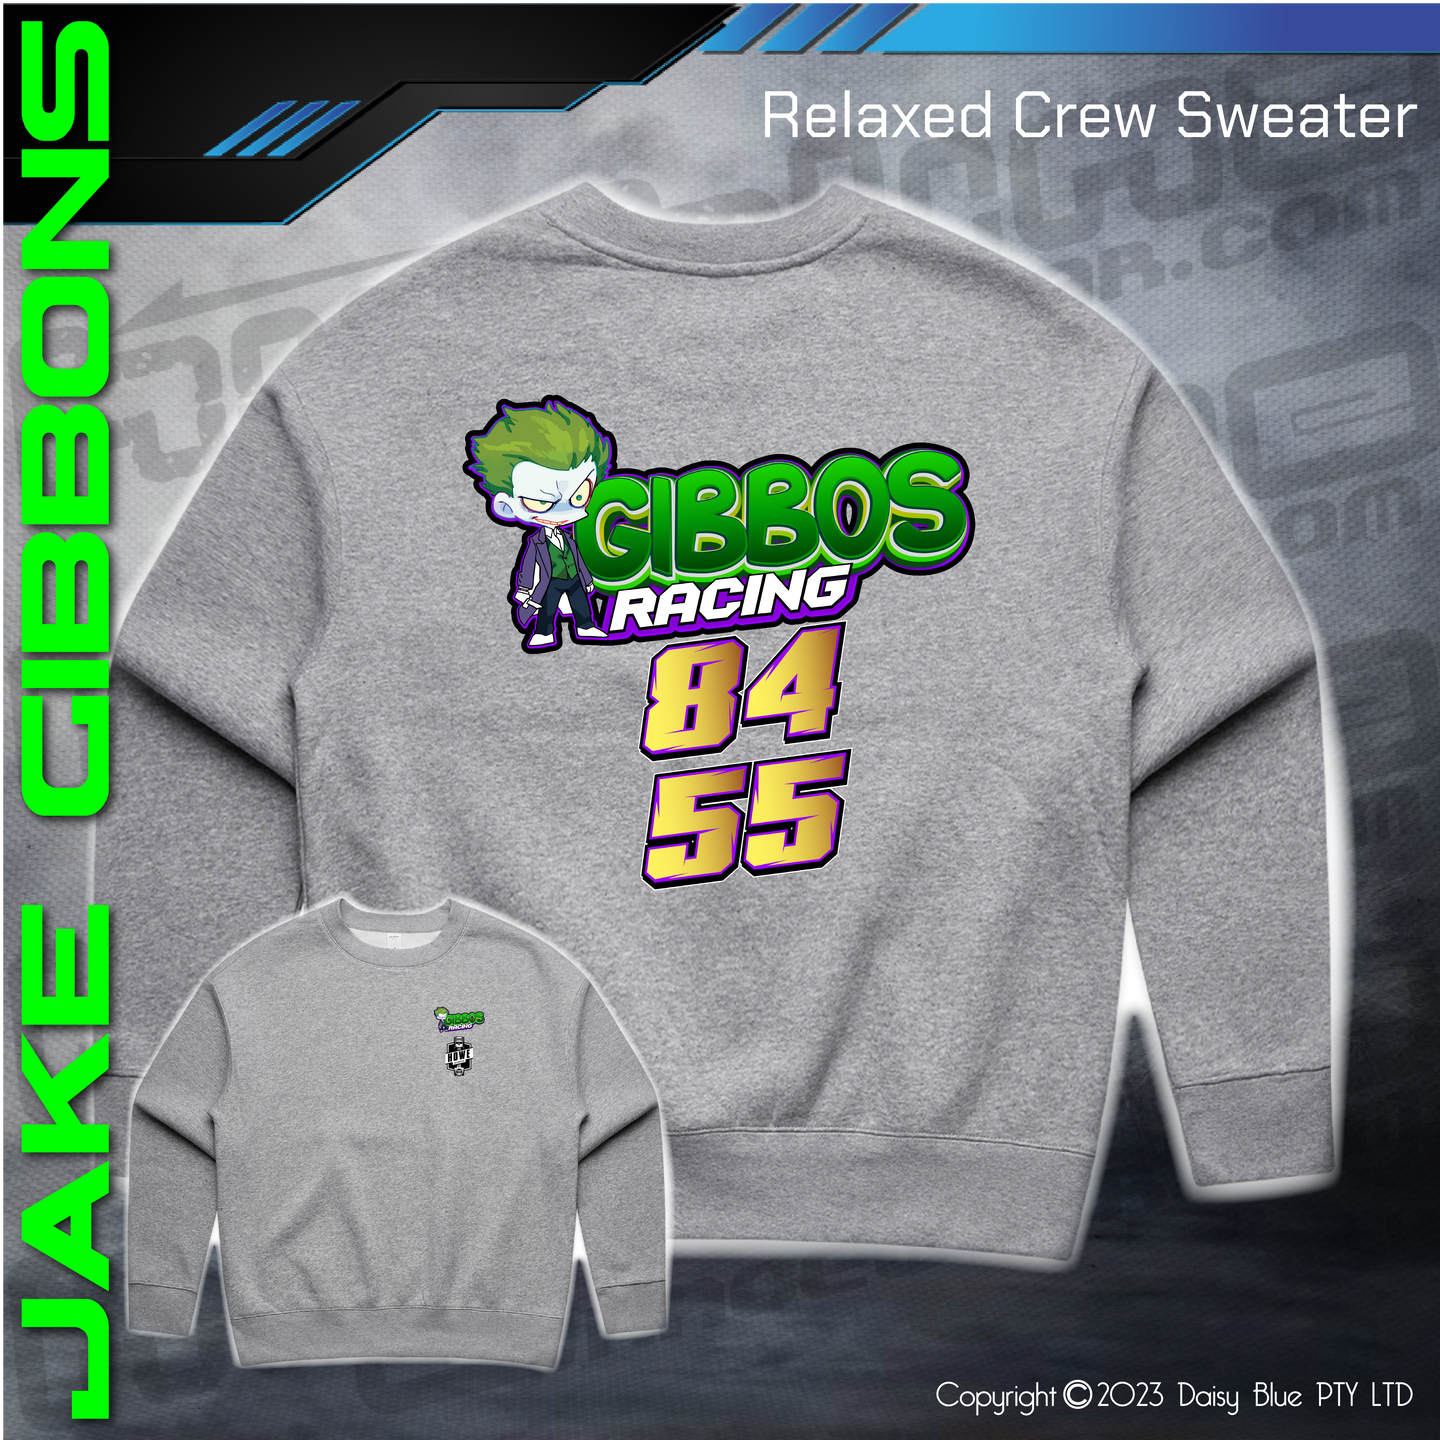 Relaxed Crew Sweater -  Jake Gibbons